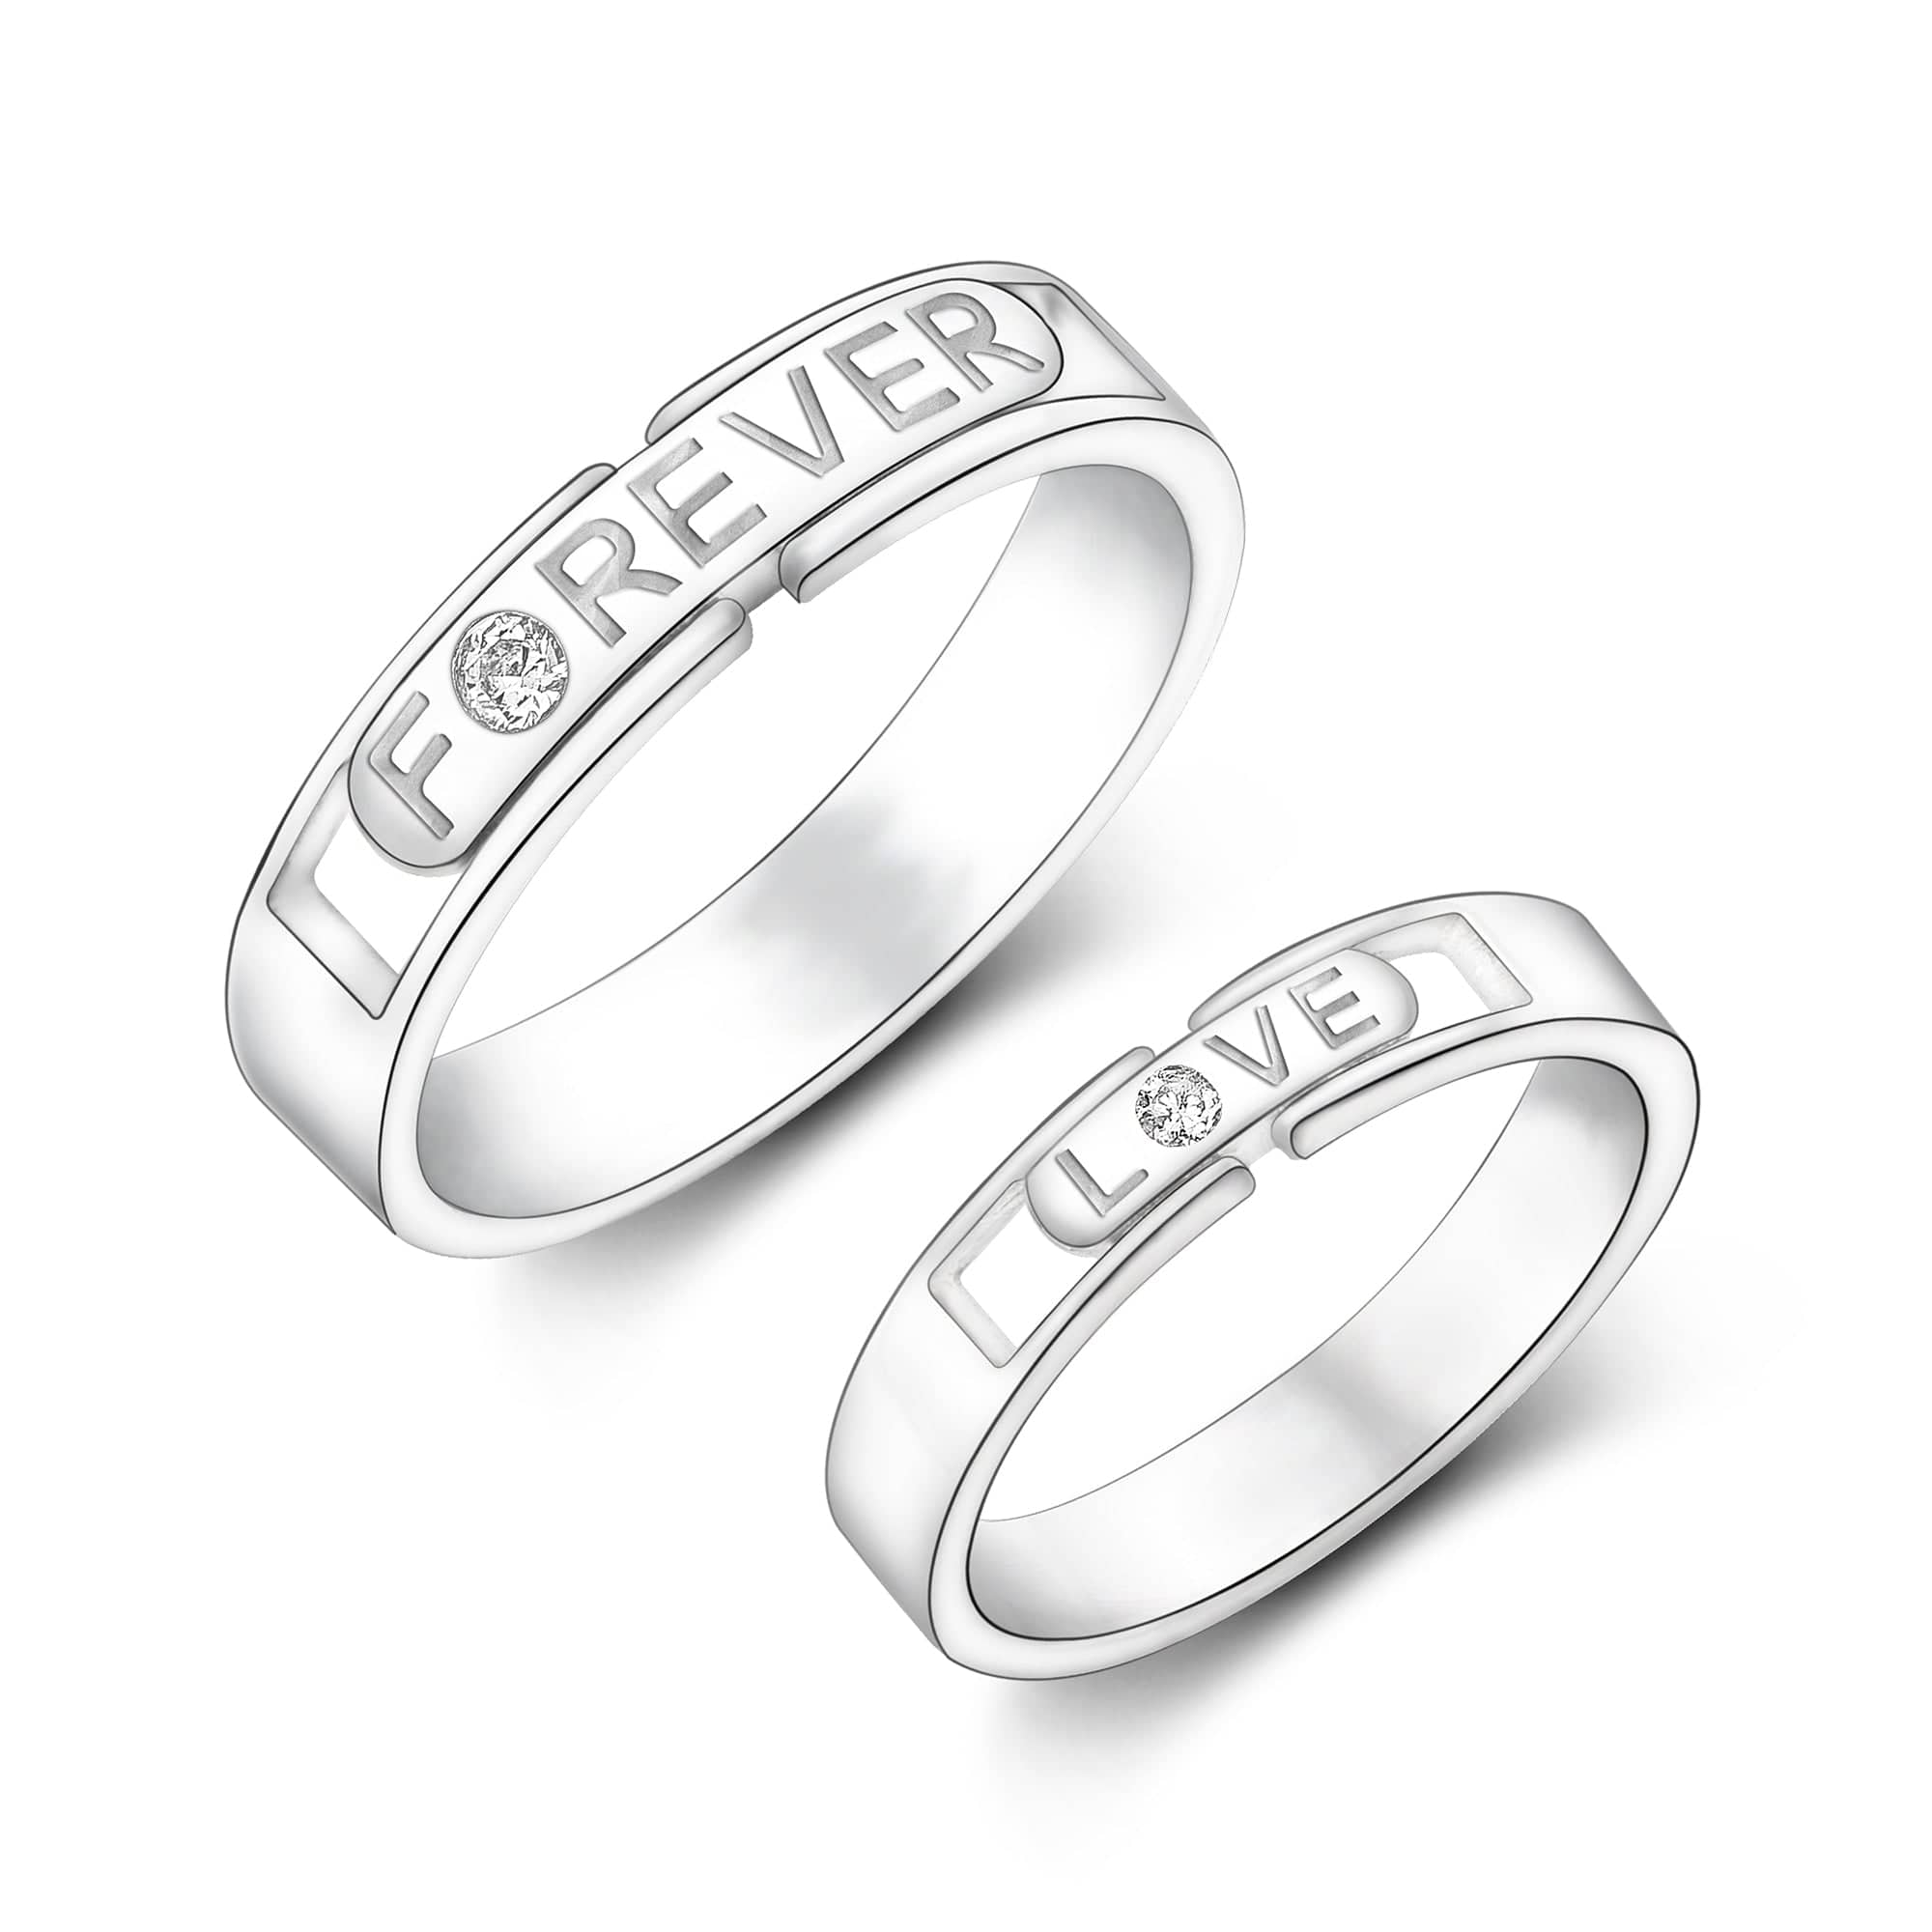 Silver wedding rings | My Couple Goal